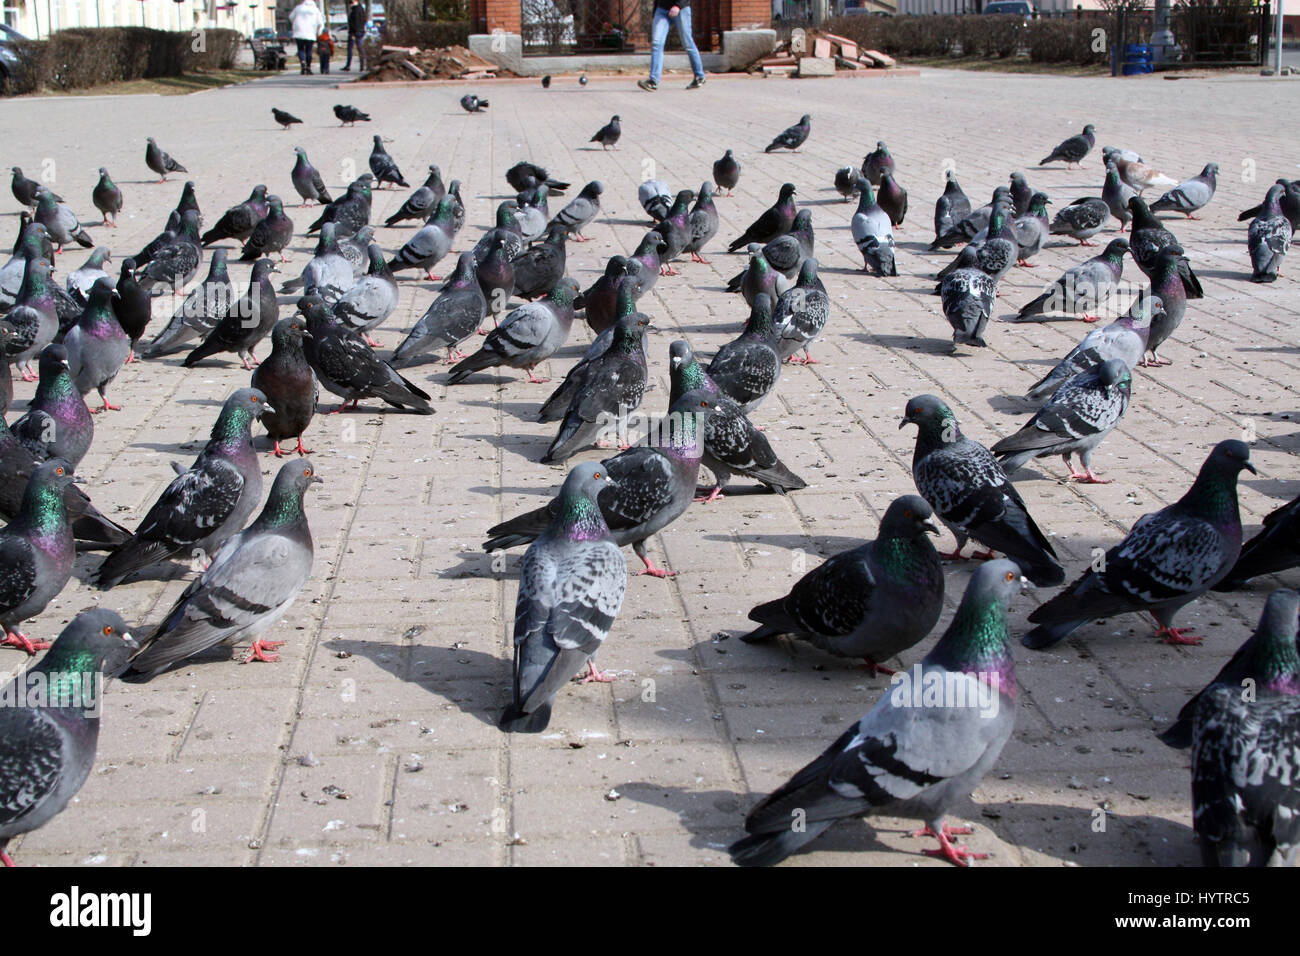 A flock of pigeons on the city square in the city of Mozhaisk in the Moscow region Stock Photo